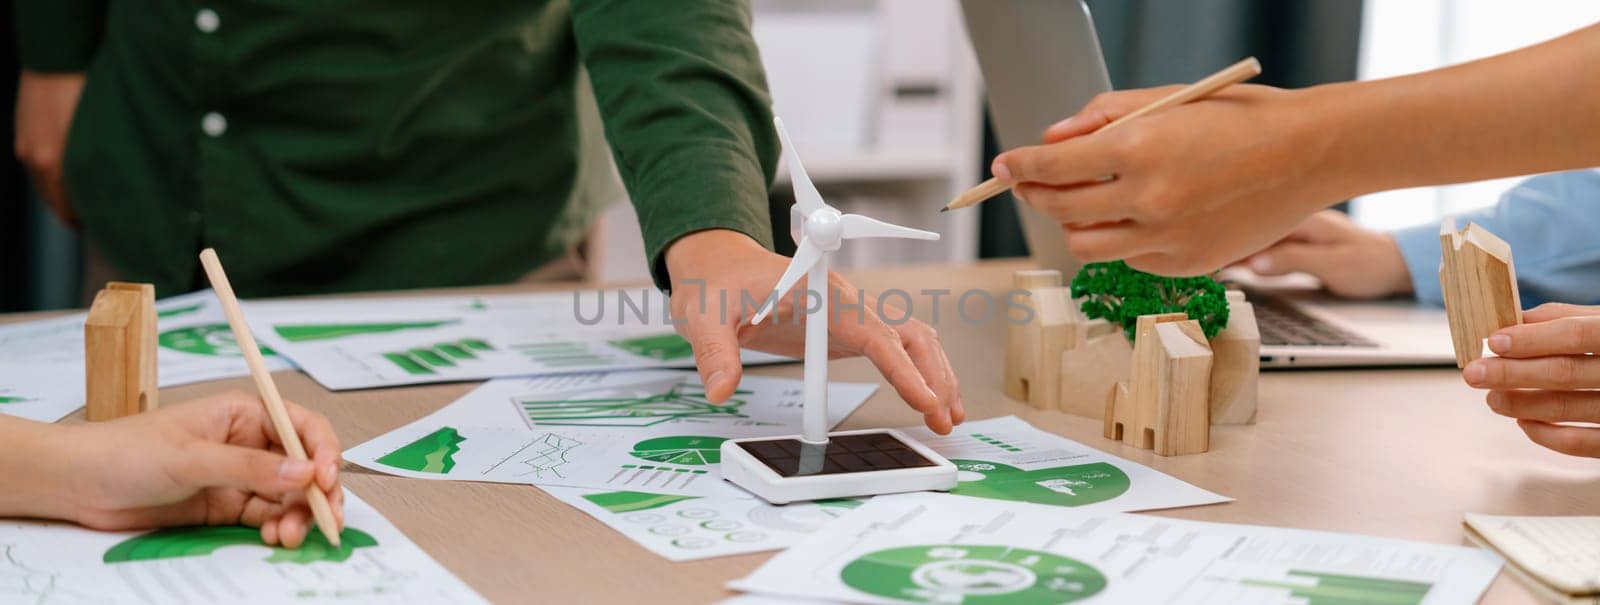 Windmill model represented renewable energy and wooden block represented eco city was placed on green business meeting table with environmental document scatter around. Front view. Delineation.